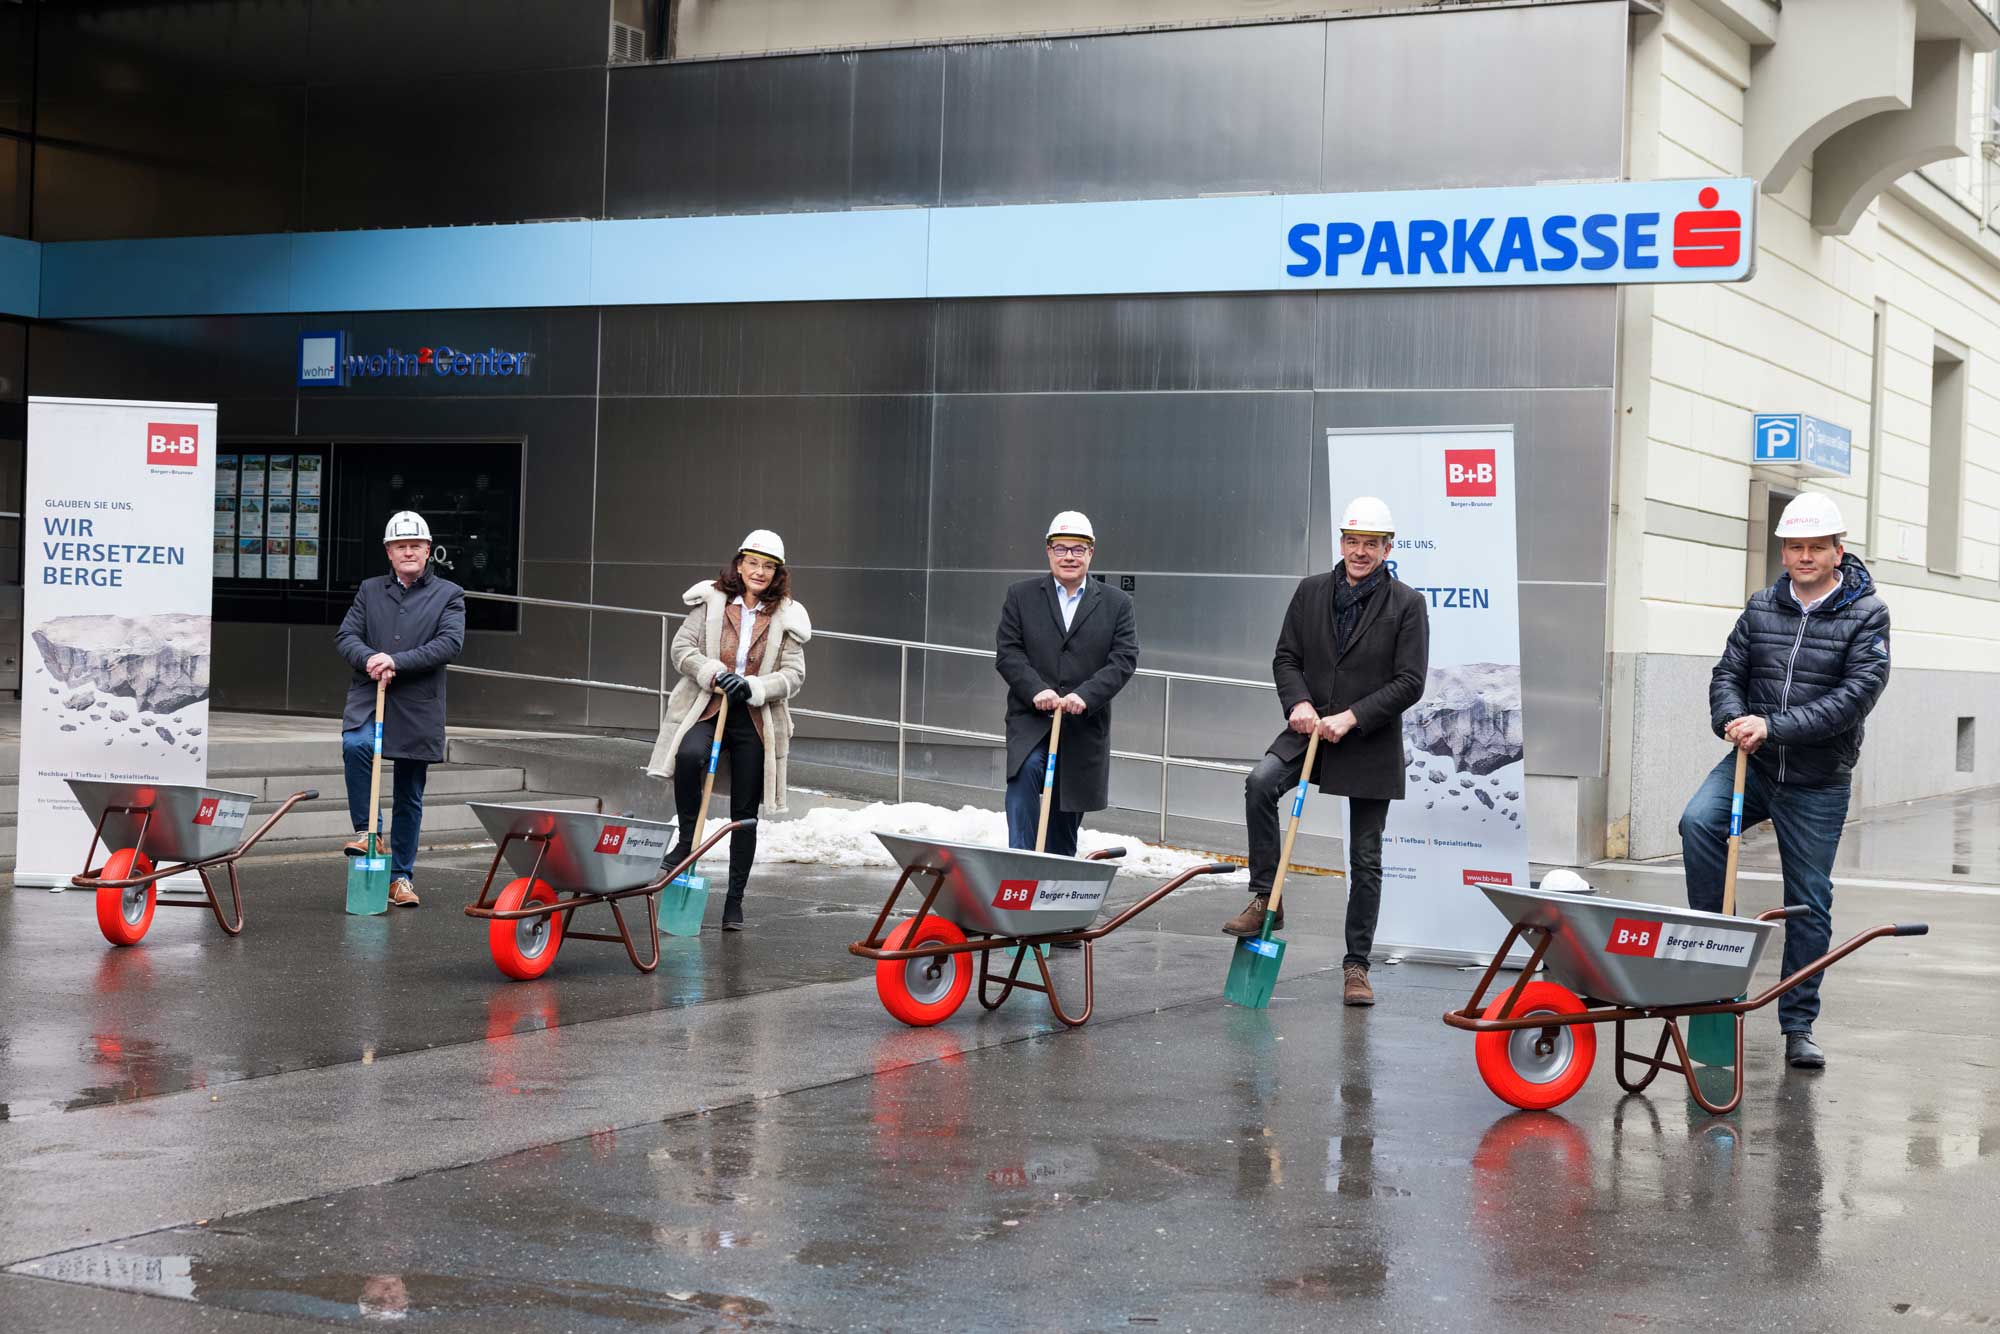 , the symbolic ground-breaking ceremony for the redesign of the Sparkassenplatz square in Innsbruck